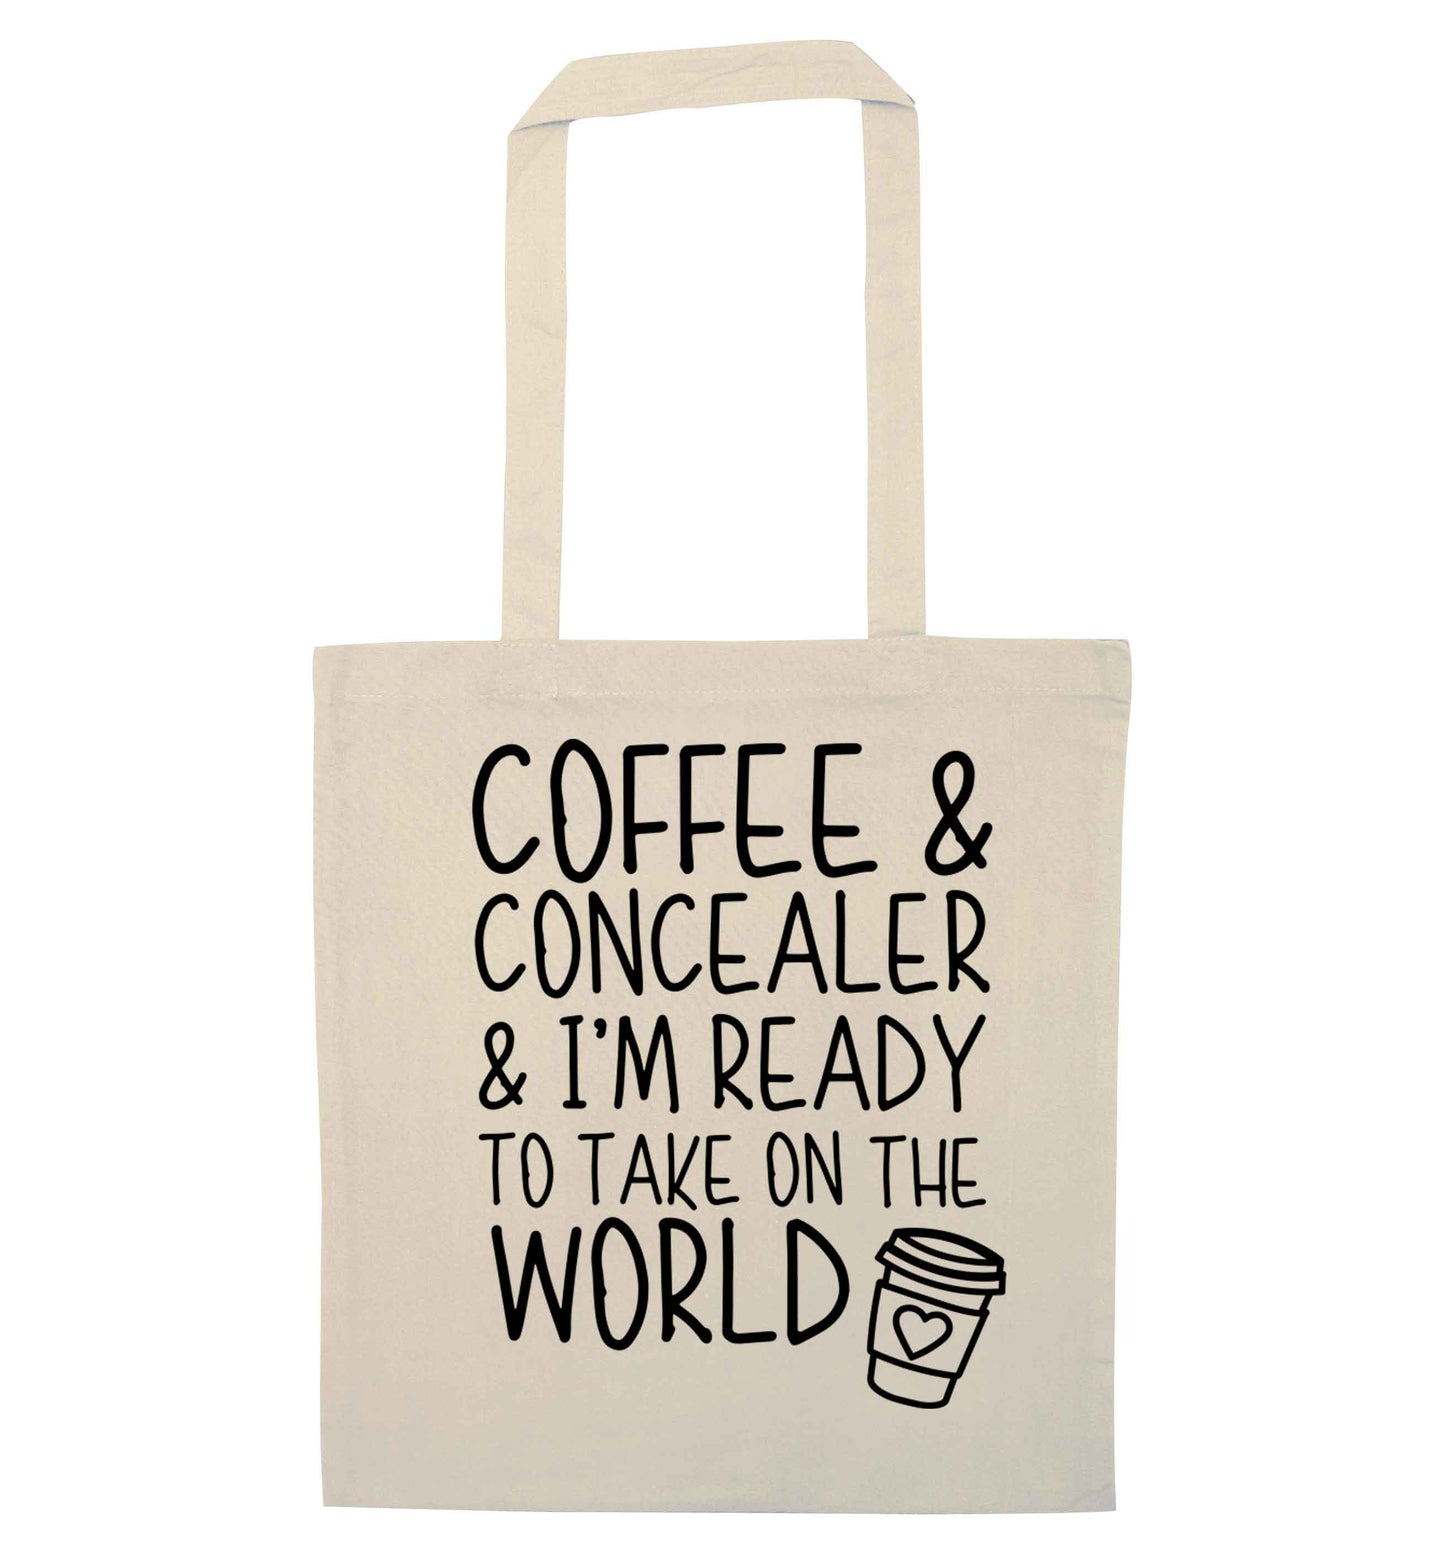 Coffee and concealer and I'm ready to take on the world natural tote bag